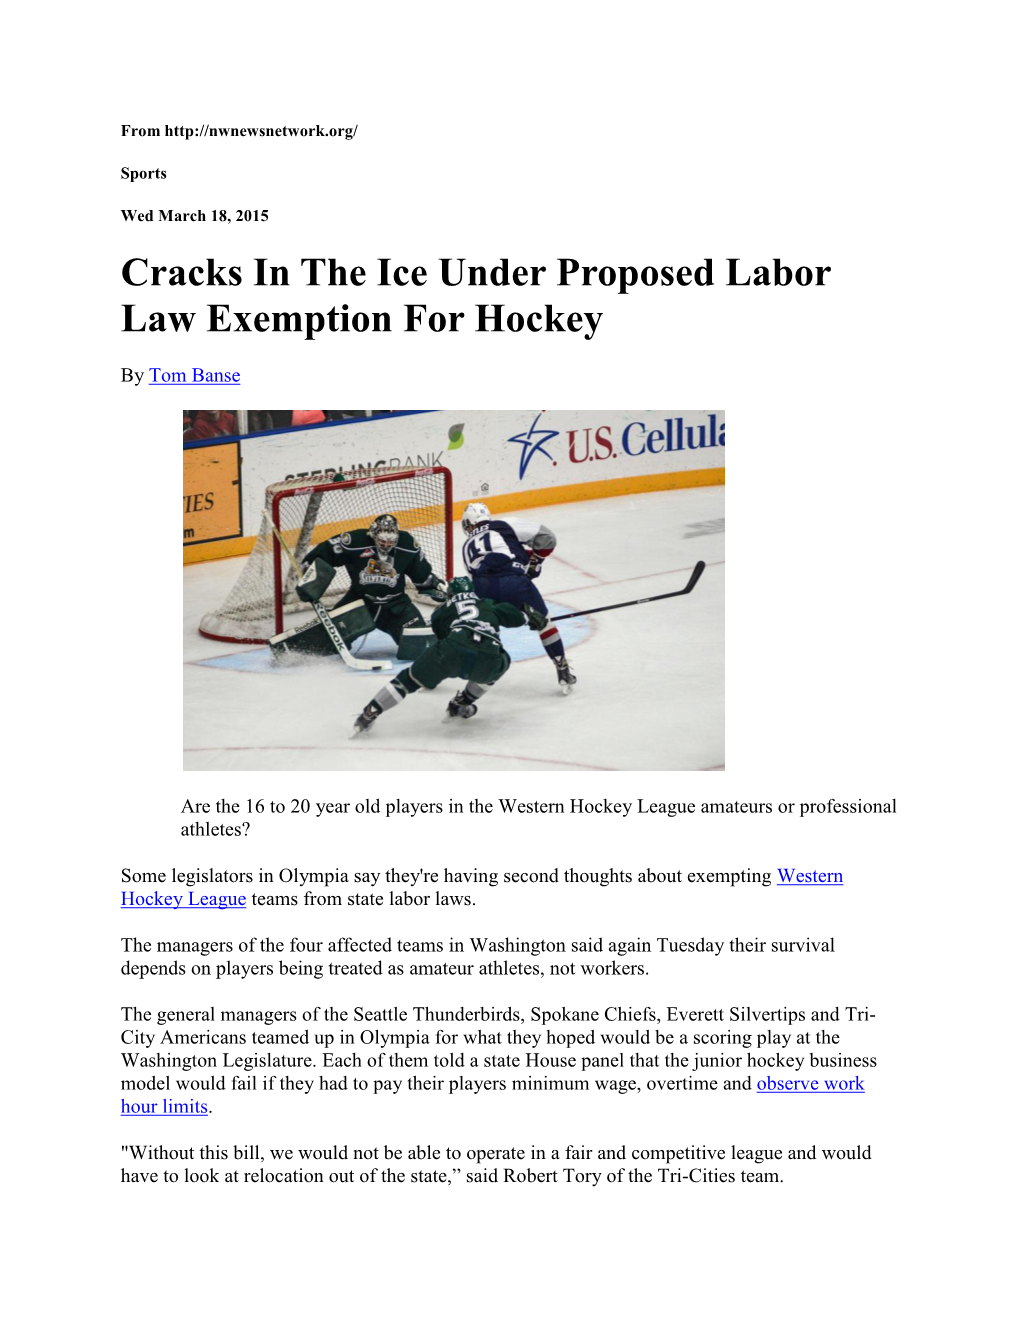 Cracks in the Ice Under Proposed Labor Law Exemption for Hockey